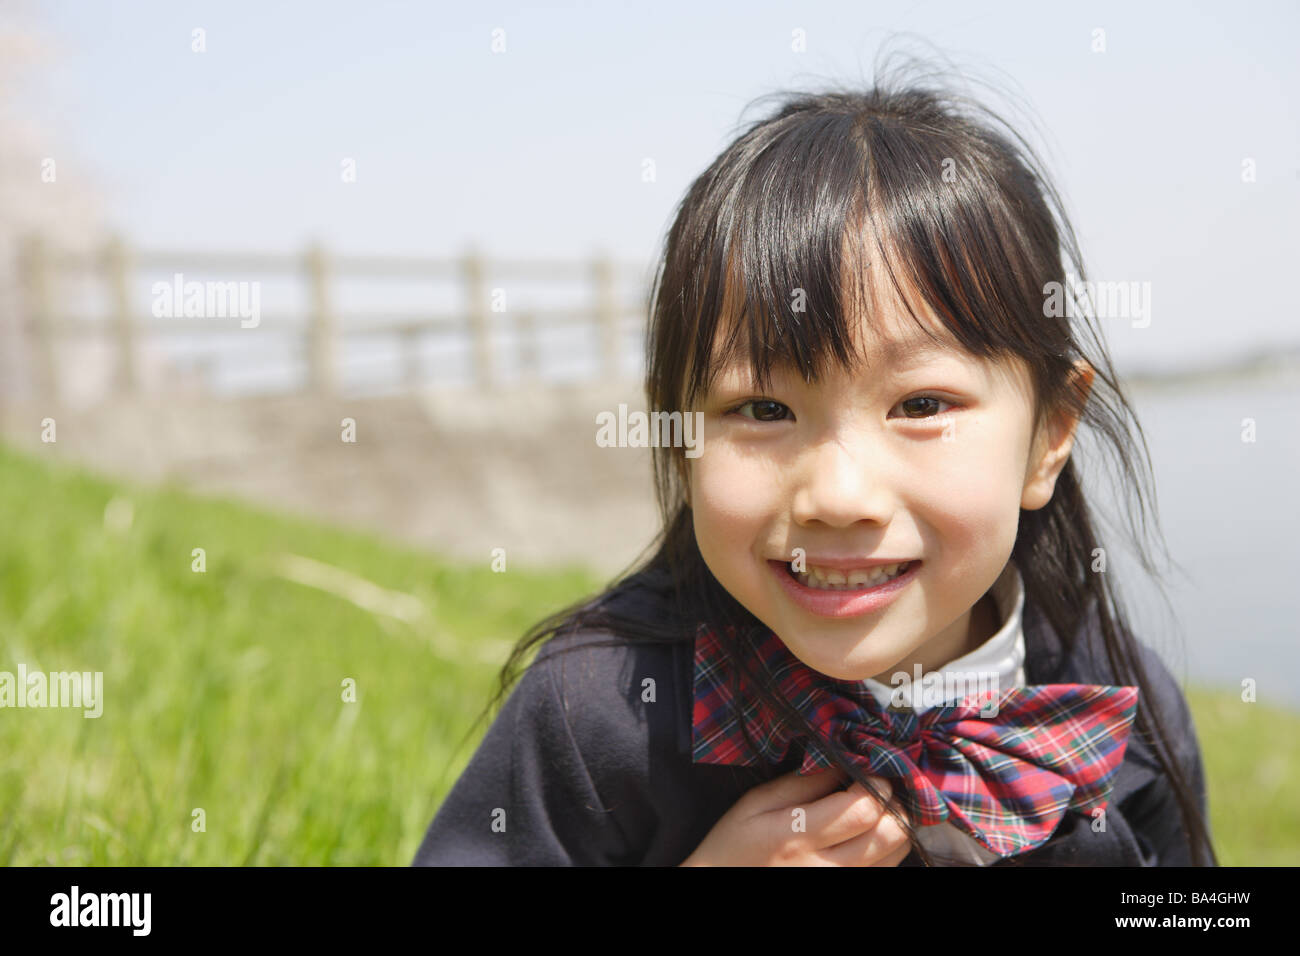 Japanese Schoolgirl smiling and looking at camera Banque D'Images